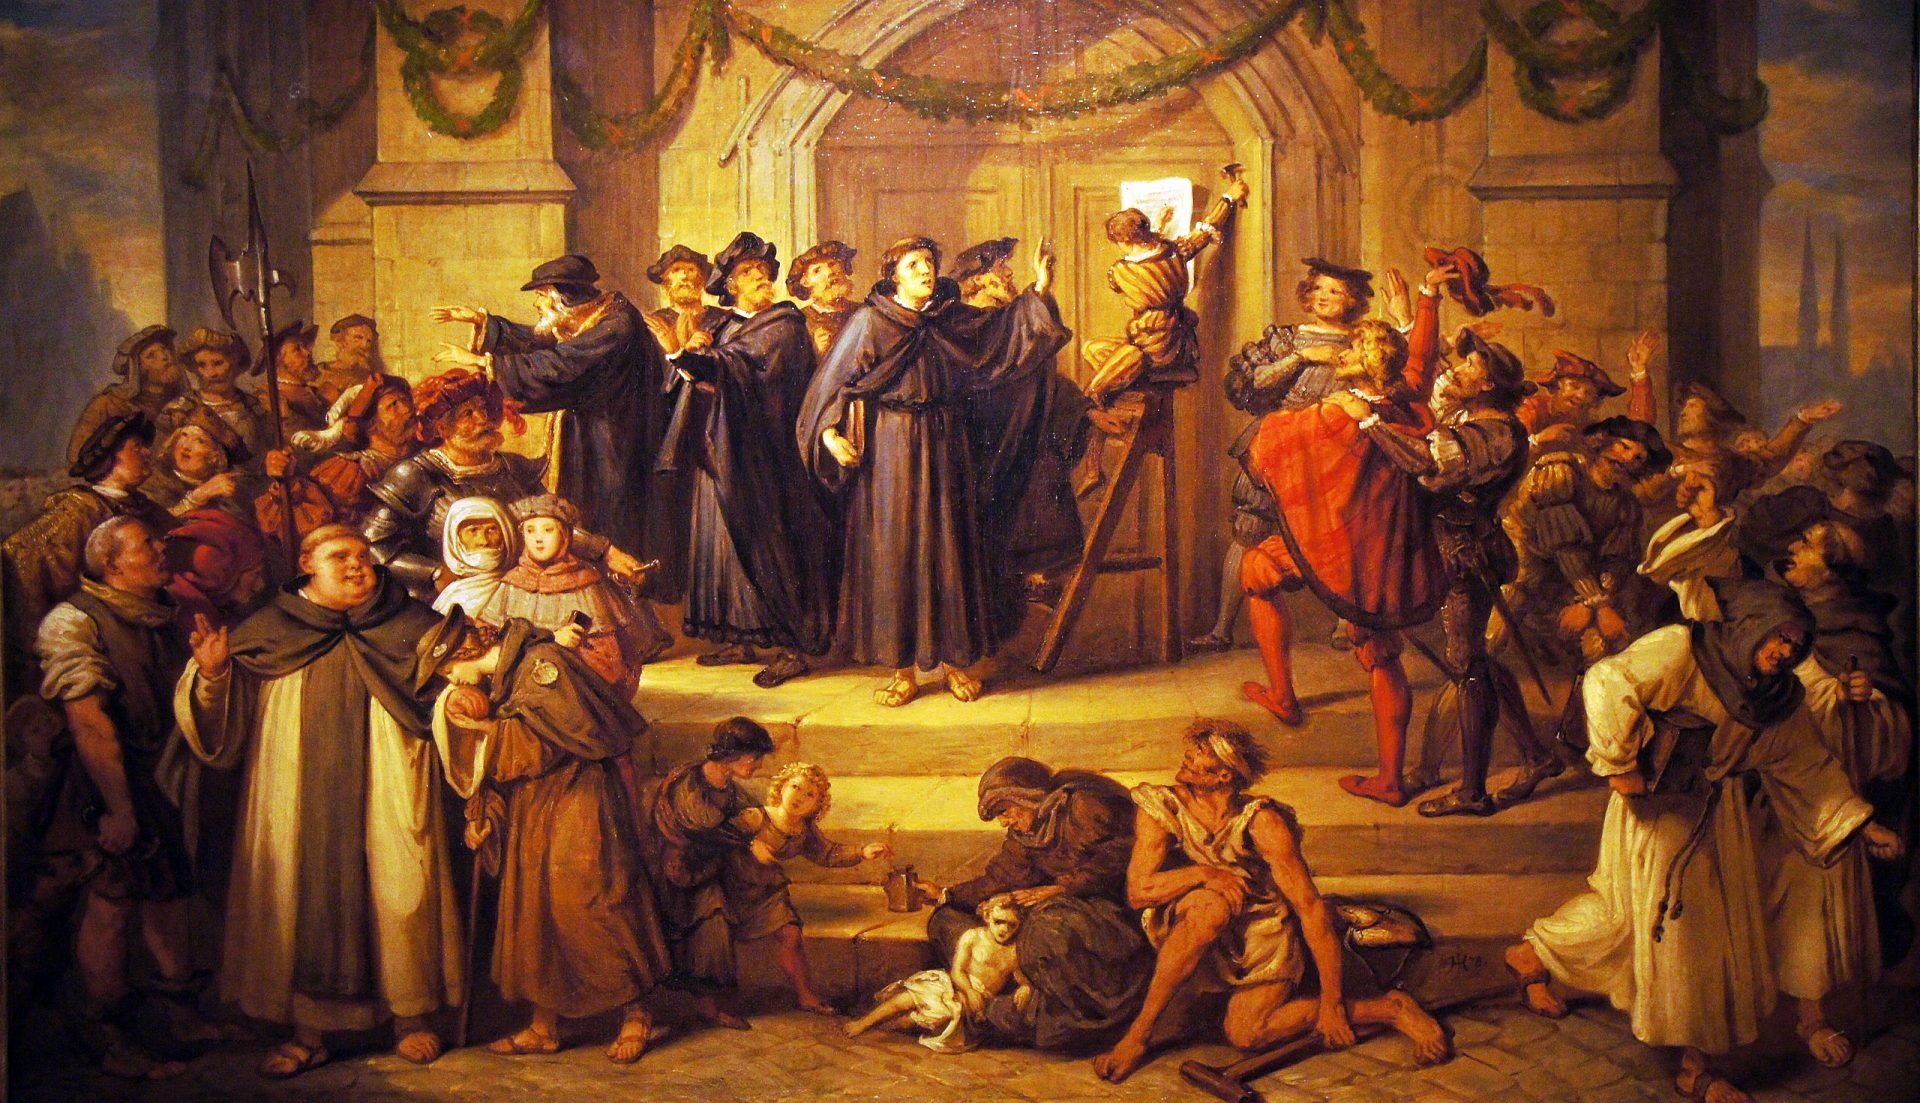 A detailed painting depicting the historic moment when Martin Luther is nailing his 95 Theses to the door of a church in Wittenberg in 1517. The scene is bustling with various figures, including clergy, townsfolk, and soldiers, all reacting to Luther's actions with a mix of surprise, approval, and disdain.